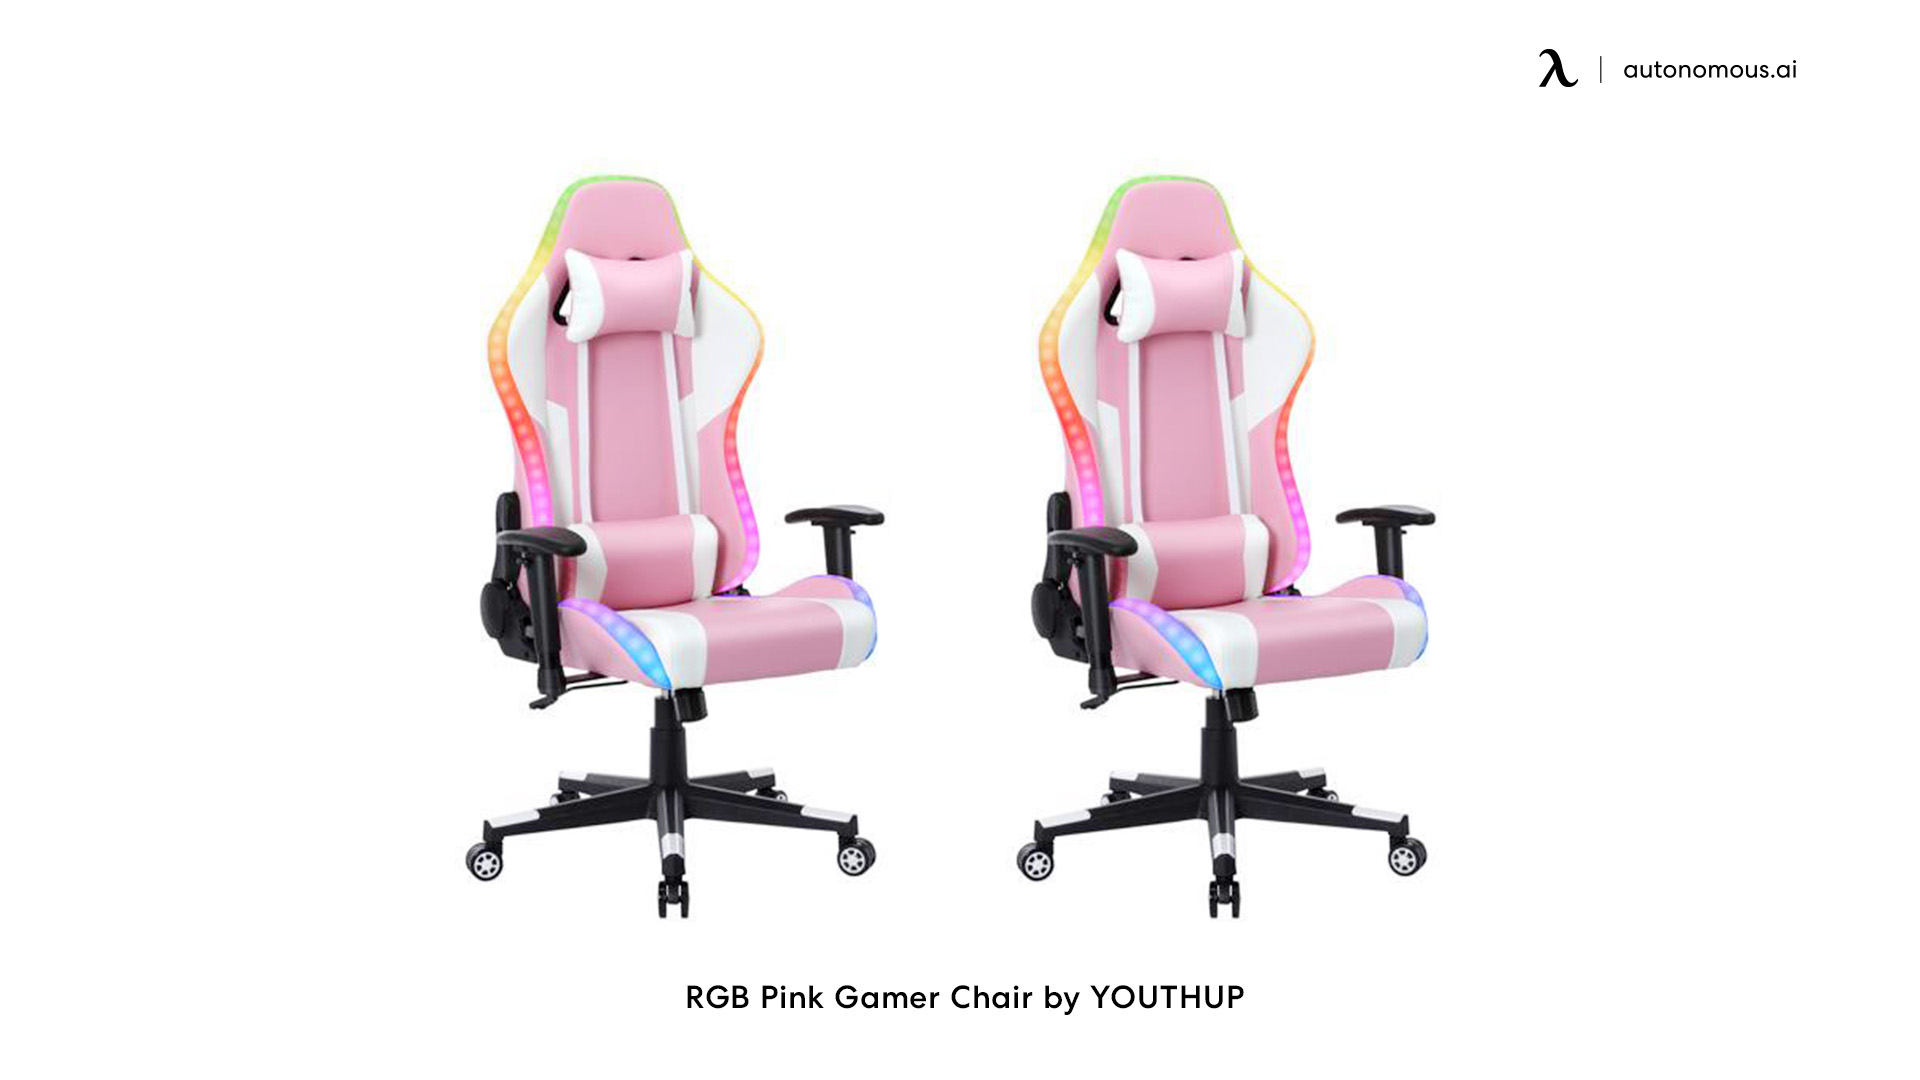 RGB Pink Gamer Chair by YOUTHUP